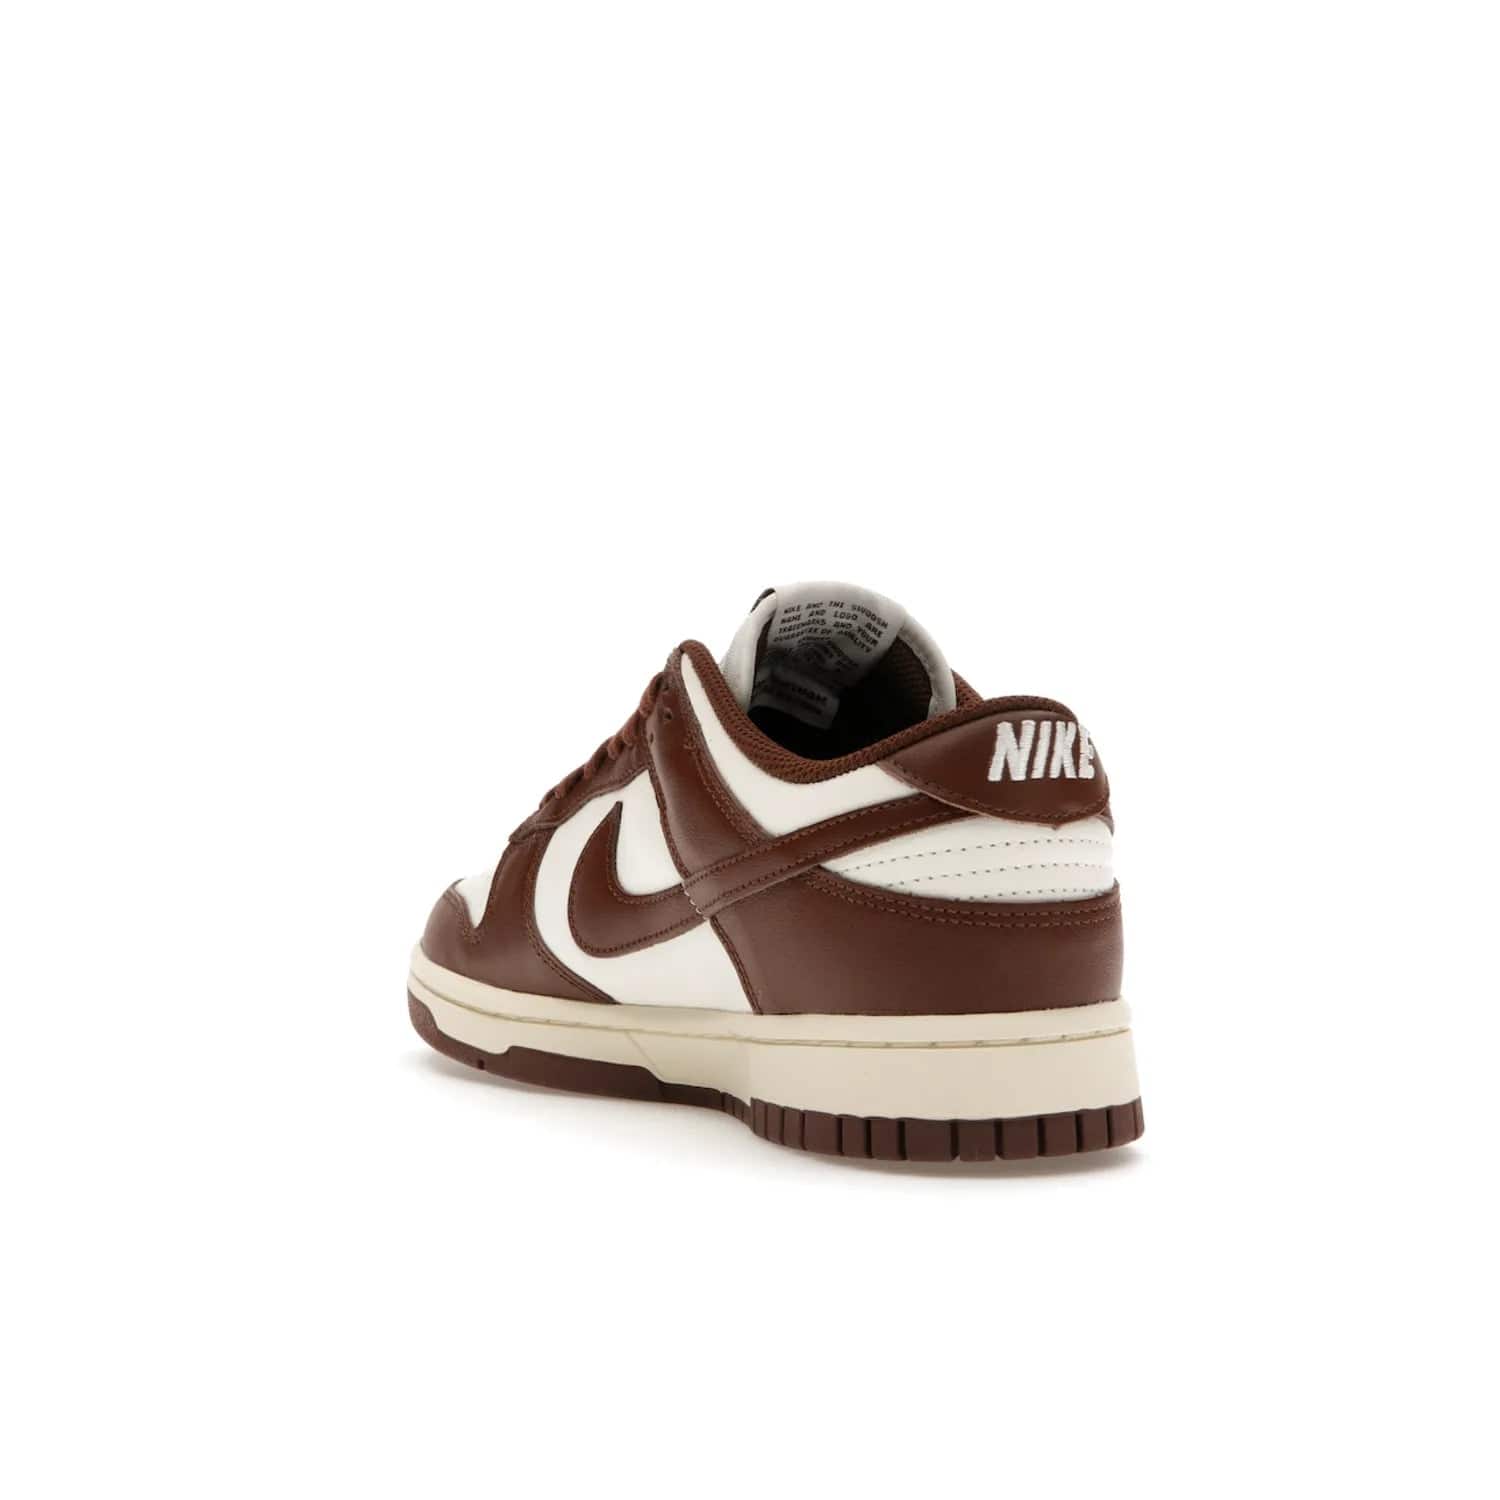 Nike Dunk Low Cacao Wow (Women's) - Image 25 - Only at www.BallersClubKickz.com - Revised
Get the Nike Dunk Low Cacao Wow and make a statement! Plush leather and a cool Cacao Wow finish bring together a unique mix of comfort and fashion that will turn heads. Boosted with a Coconut Milk hue. Shop today.